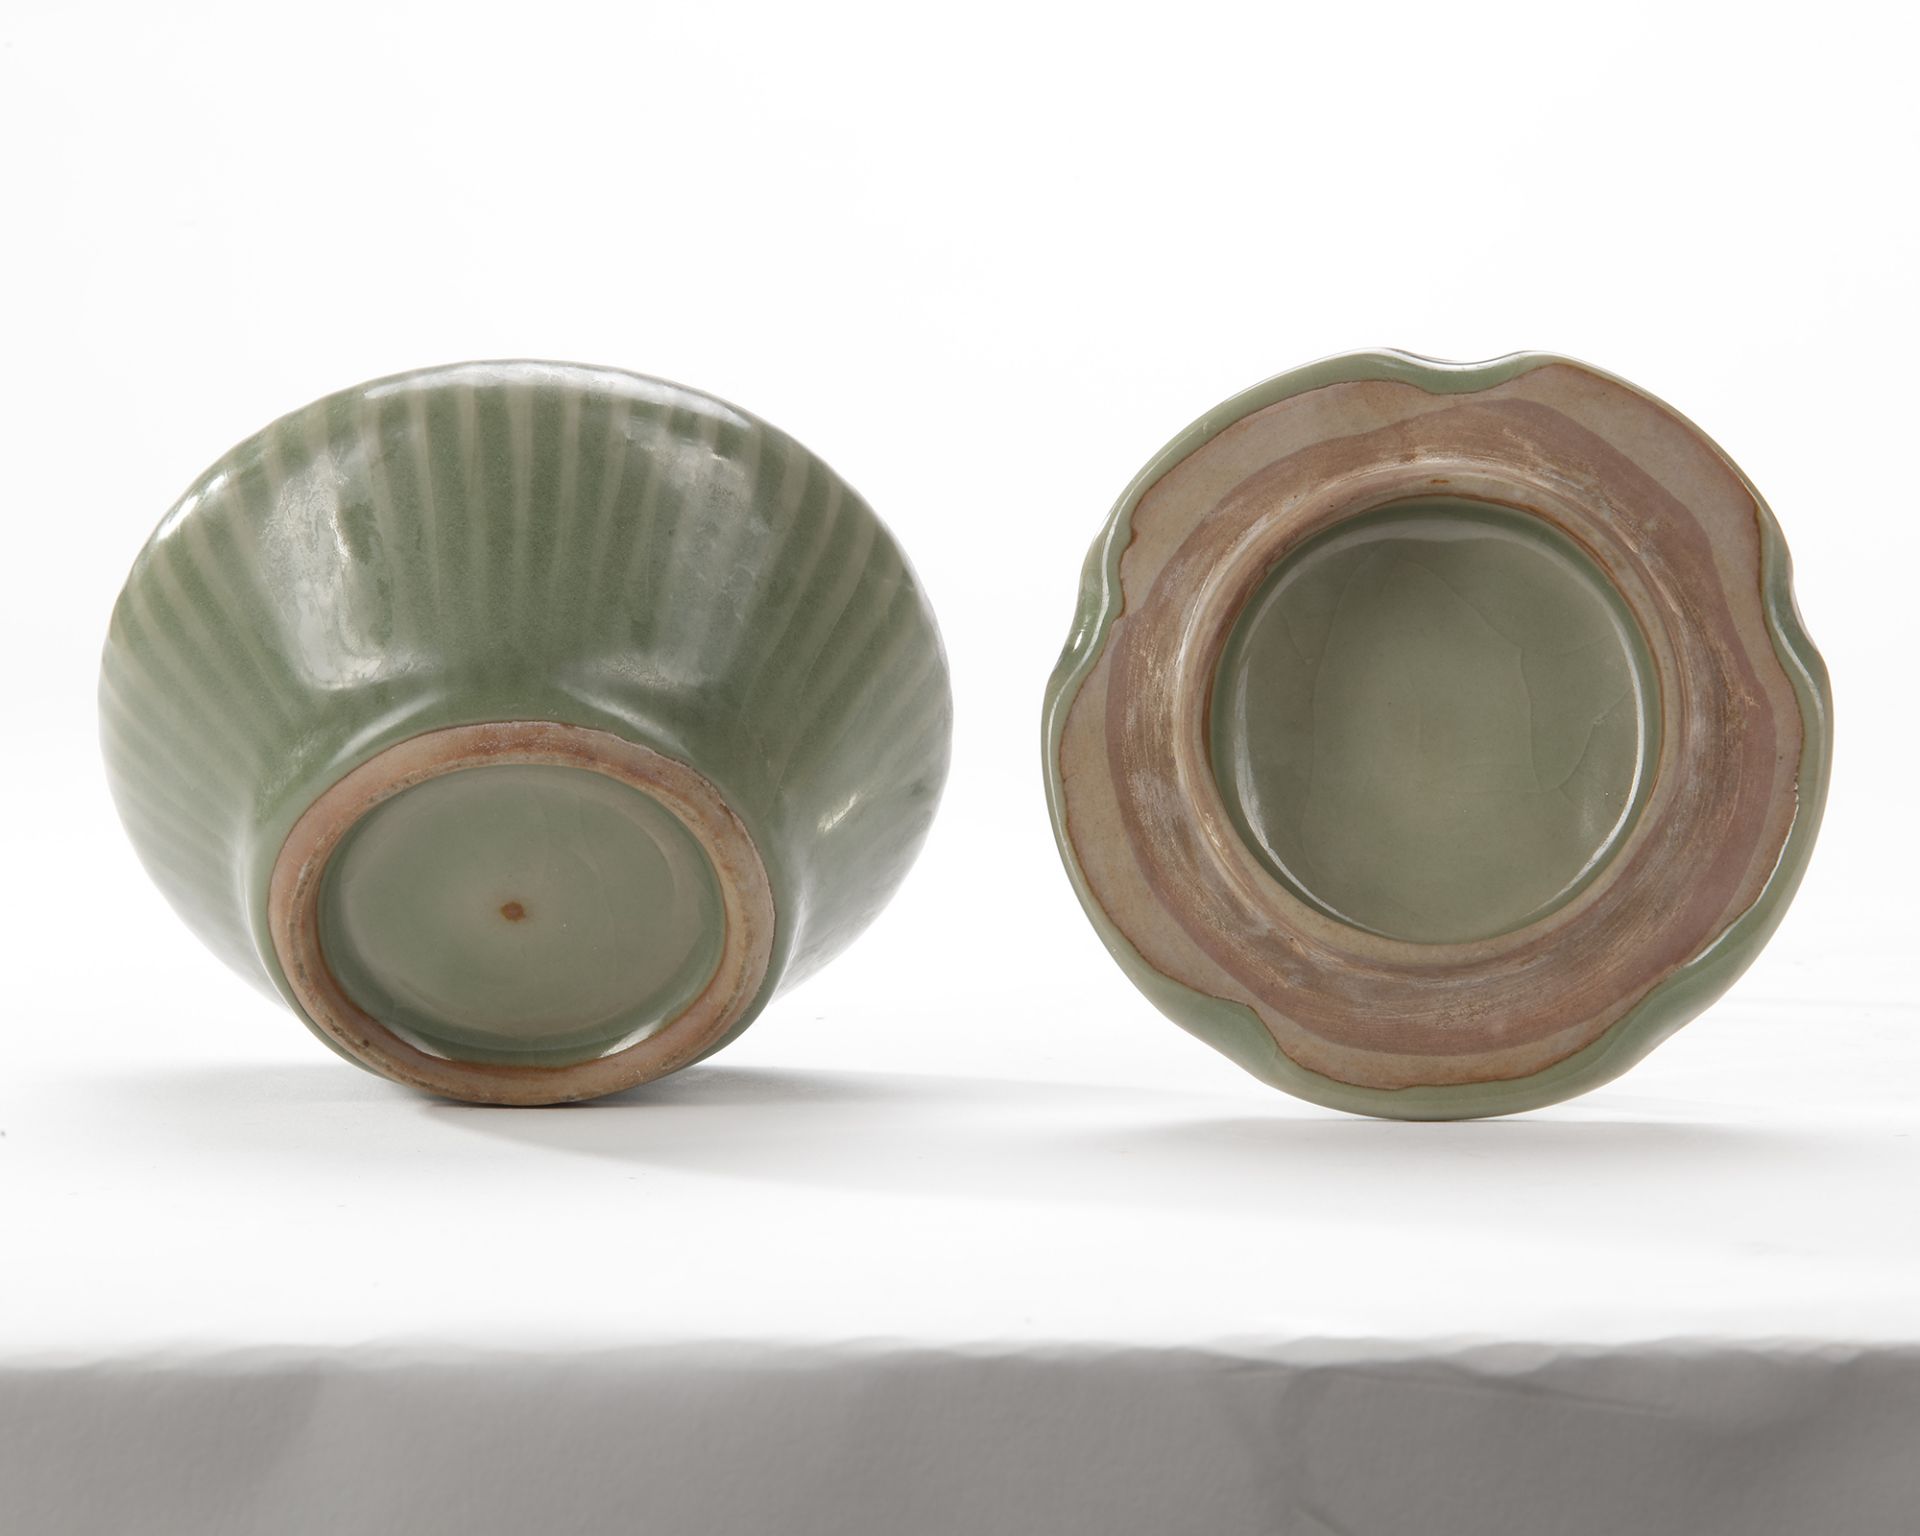 A CHINESE LONGQUAN CELADON CRACKLED ‘HUNDRED RIB’ JAR AND ‘LOTUS’ COVER, MING DYNASTY (1368-1644) - Bild 4 aus 4